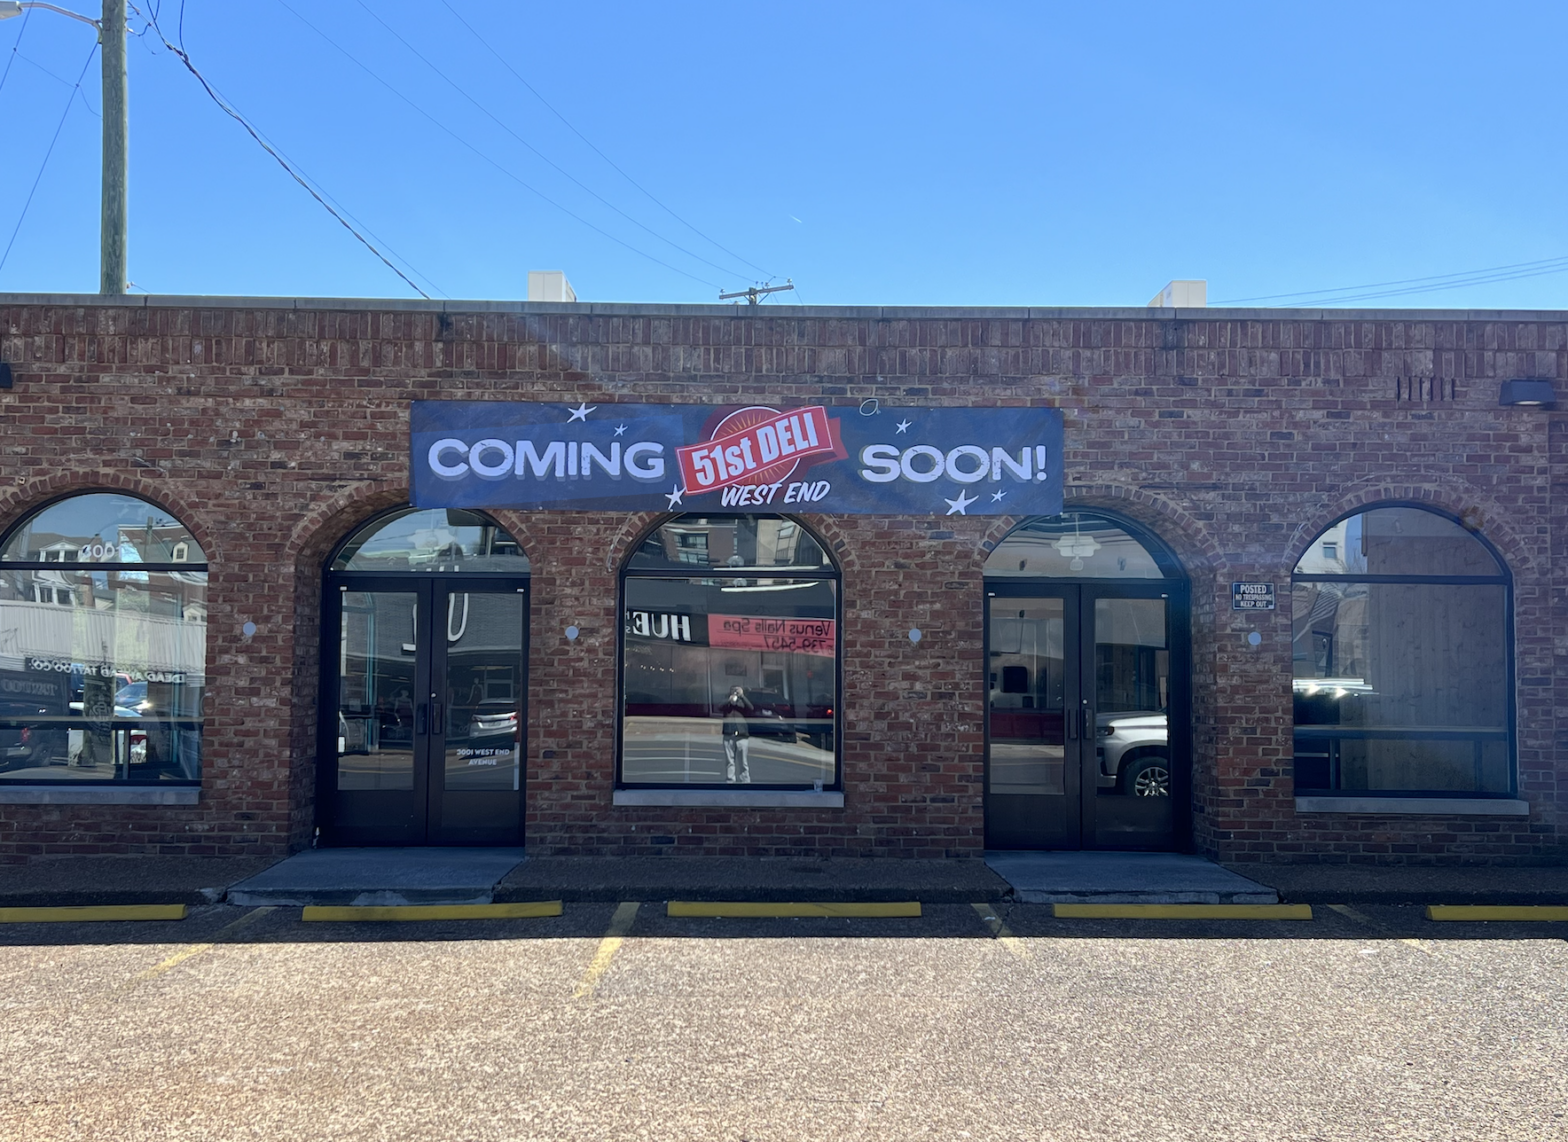 51st Deli Expanding with Three Future Locations, Opening Soon in West